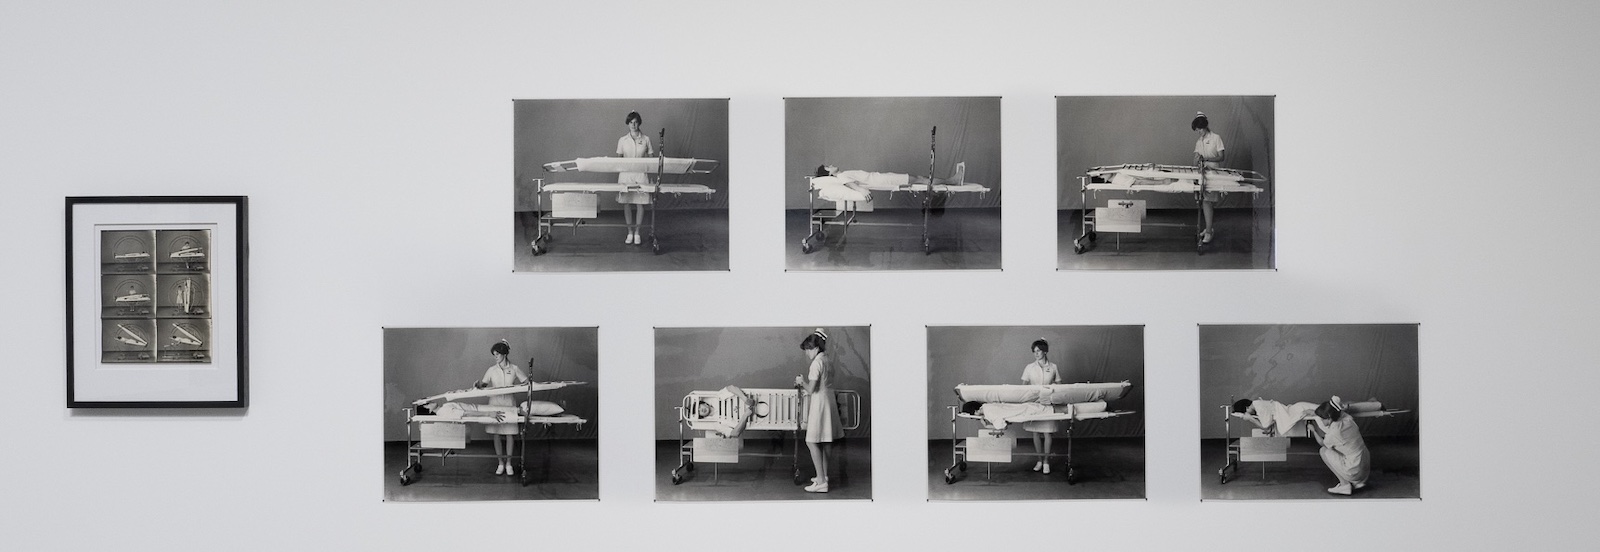 A collection of black and white photographs are mounted on a white art gallery wall. They depict a person in a white nurse’s uniform working with a patient (the artist Theodore Sasketche Wan) in a stretcher-like contraption.